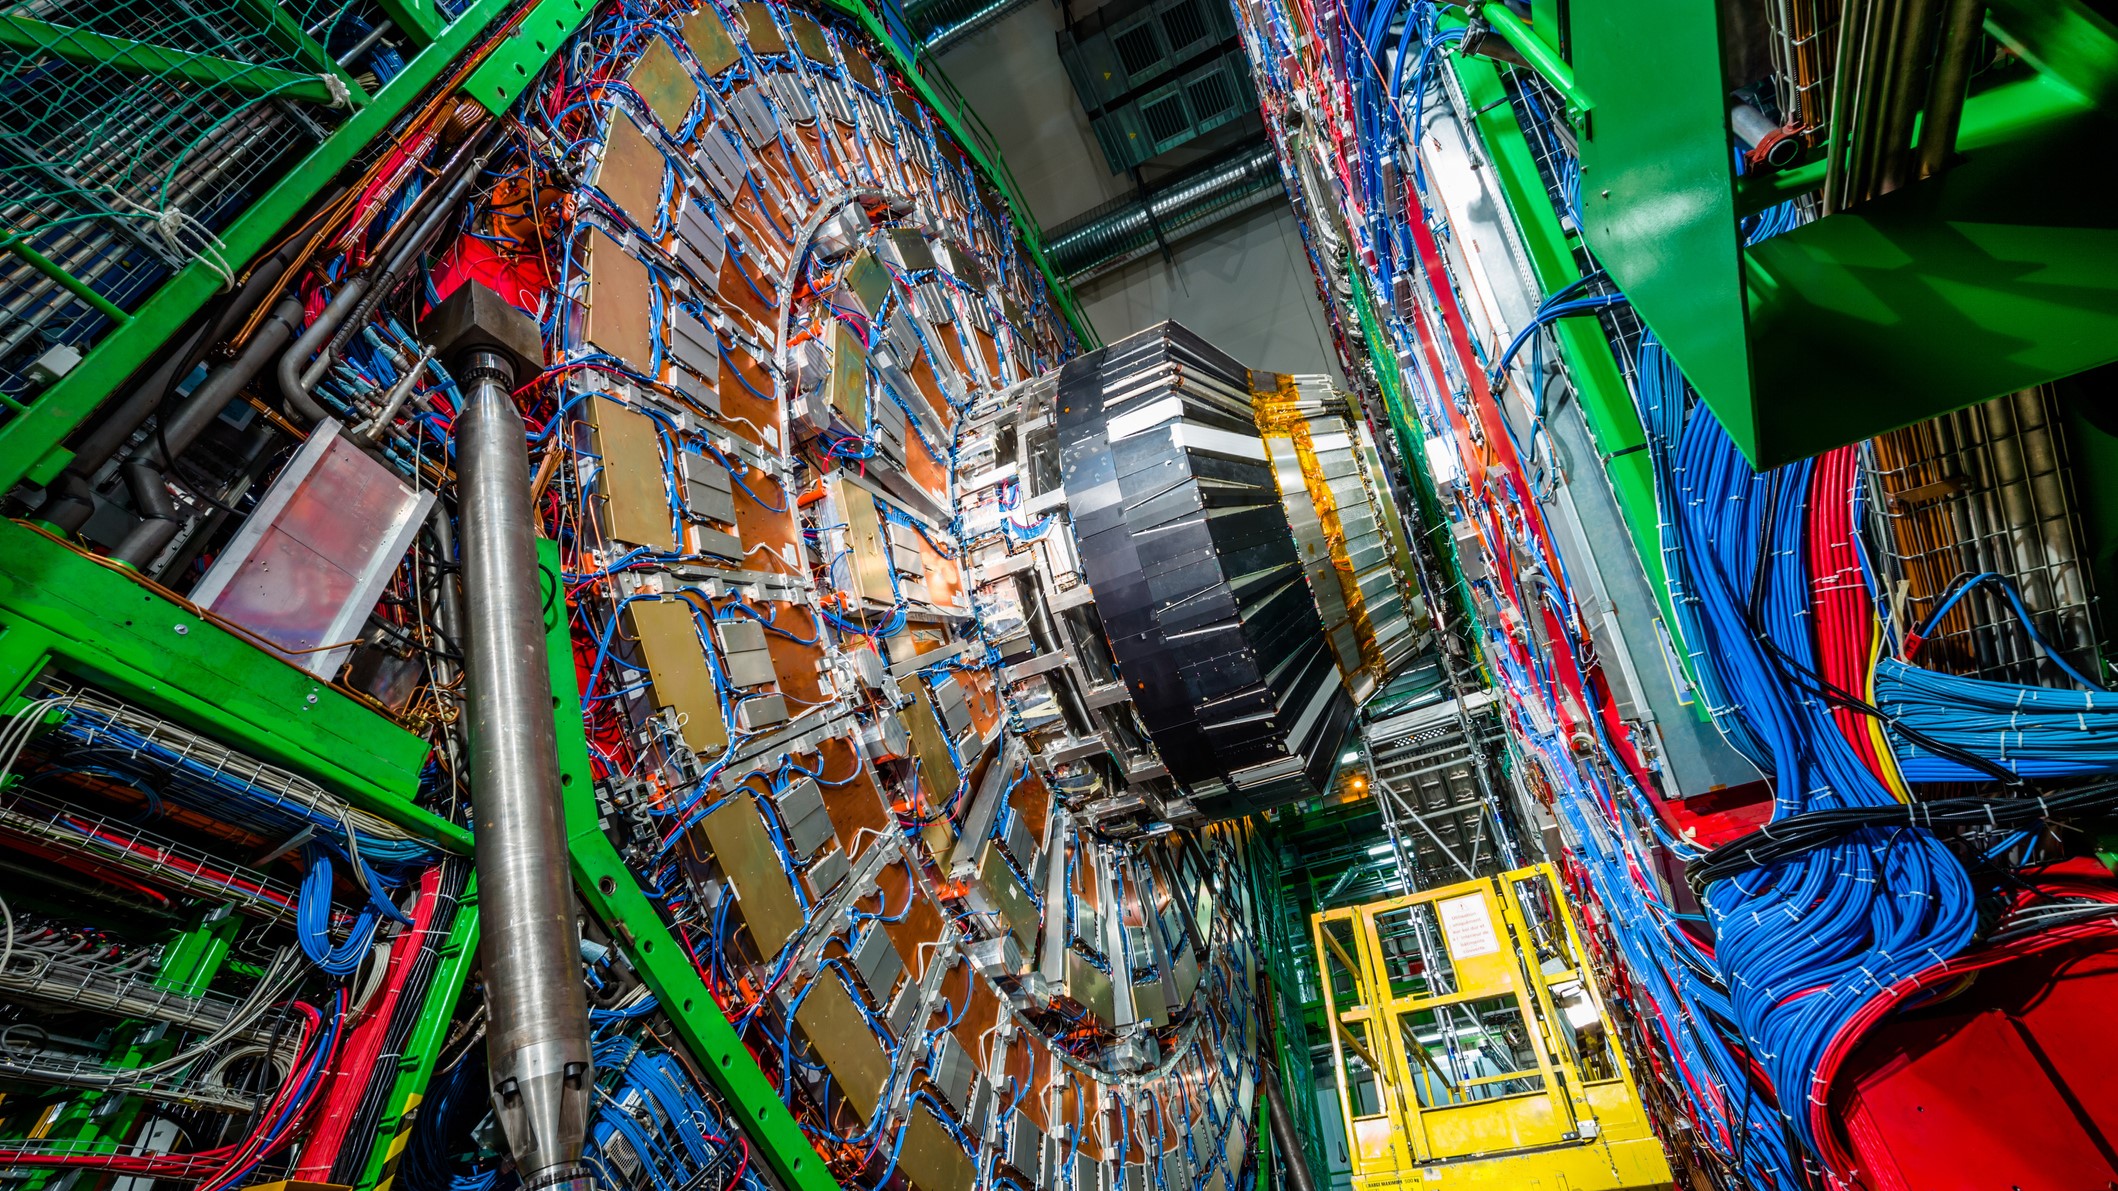 The Compact Muon Solenoid (CMS) pictured here can capture images of particles up to 40 million times per second.